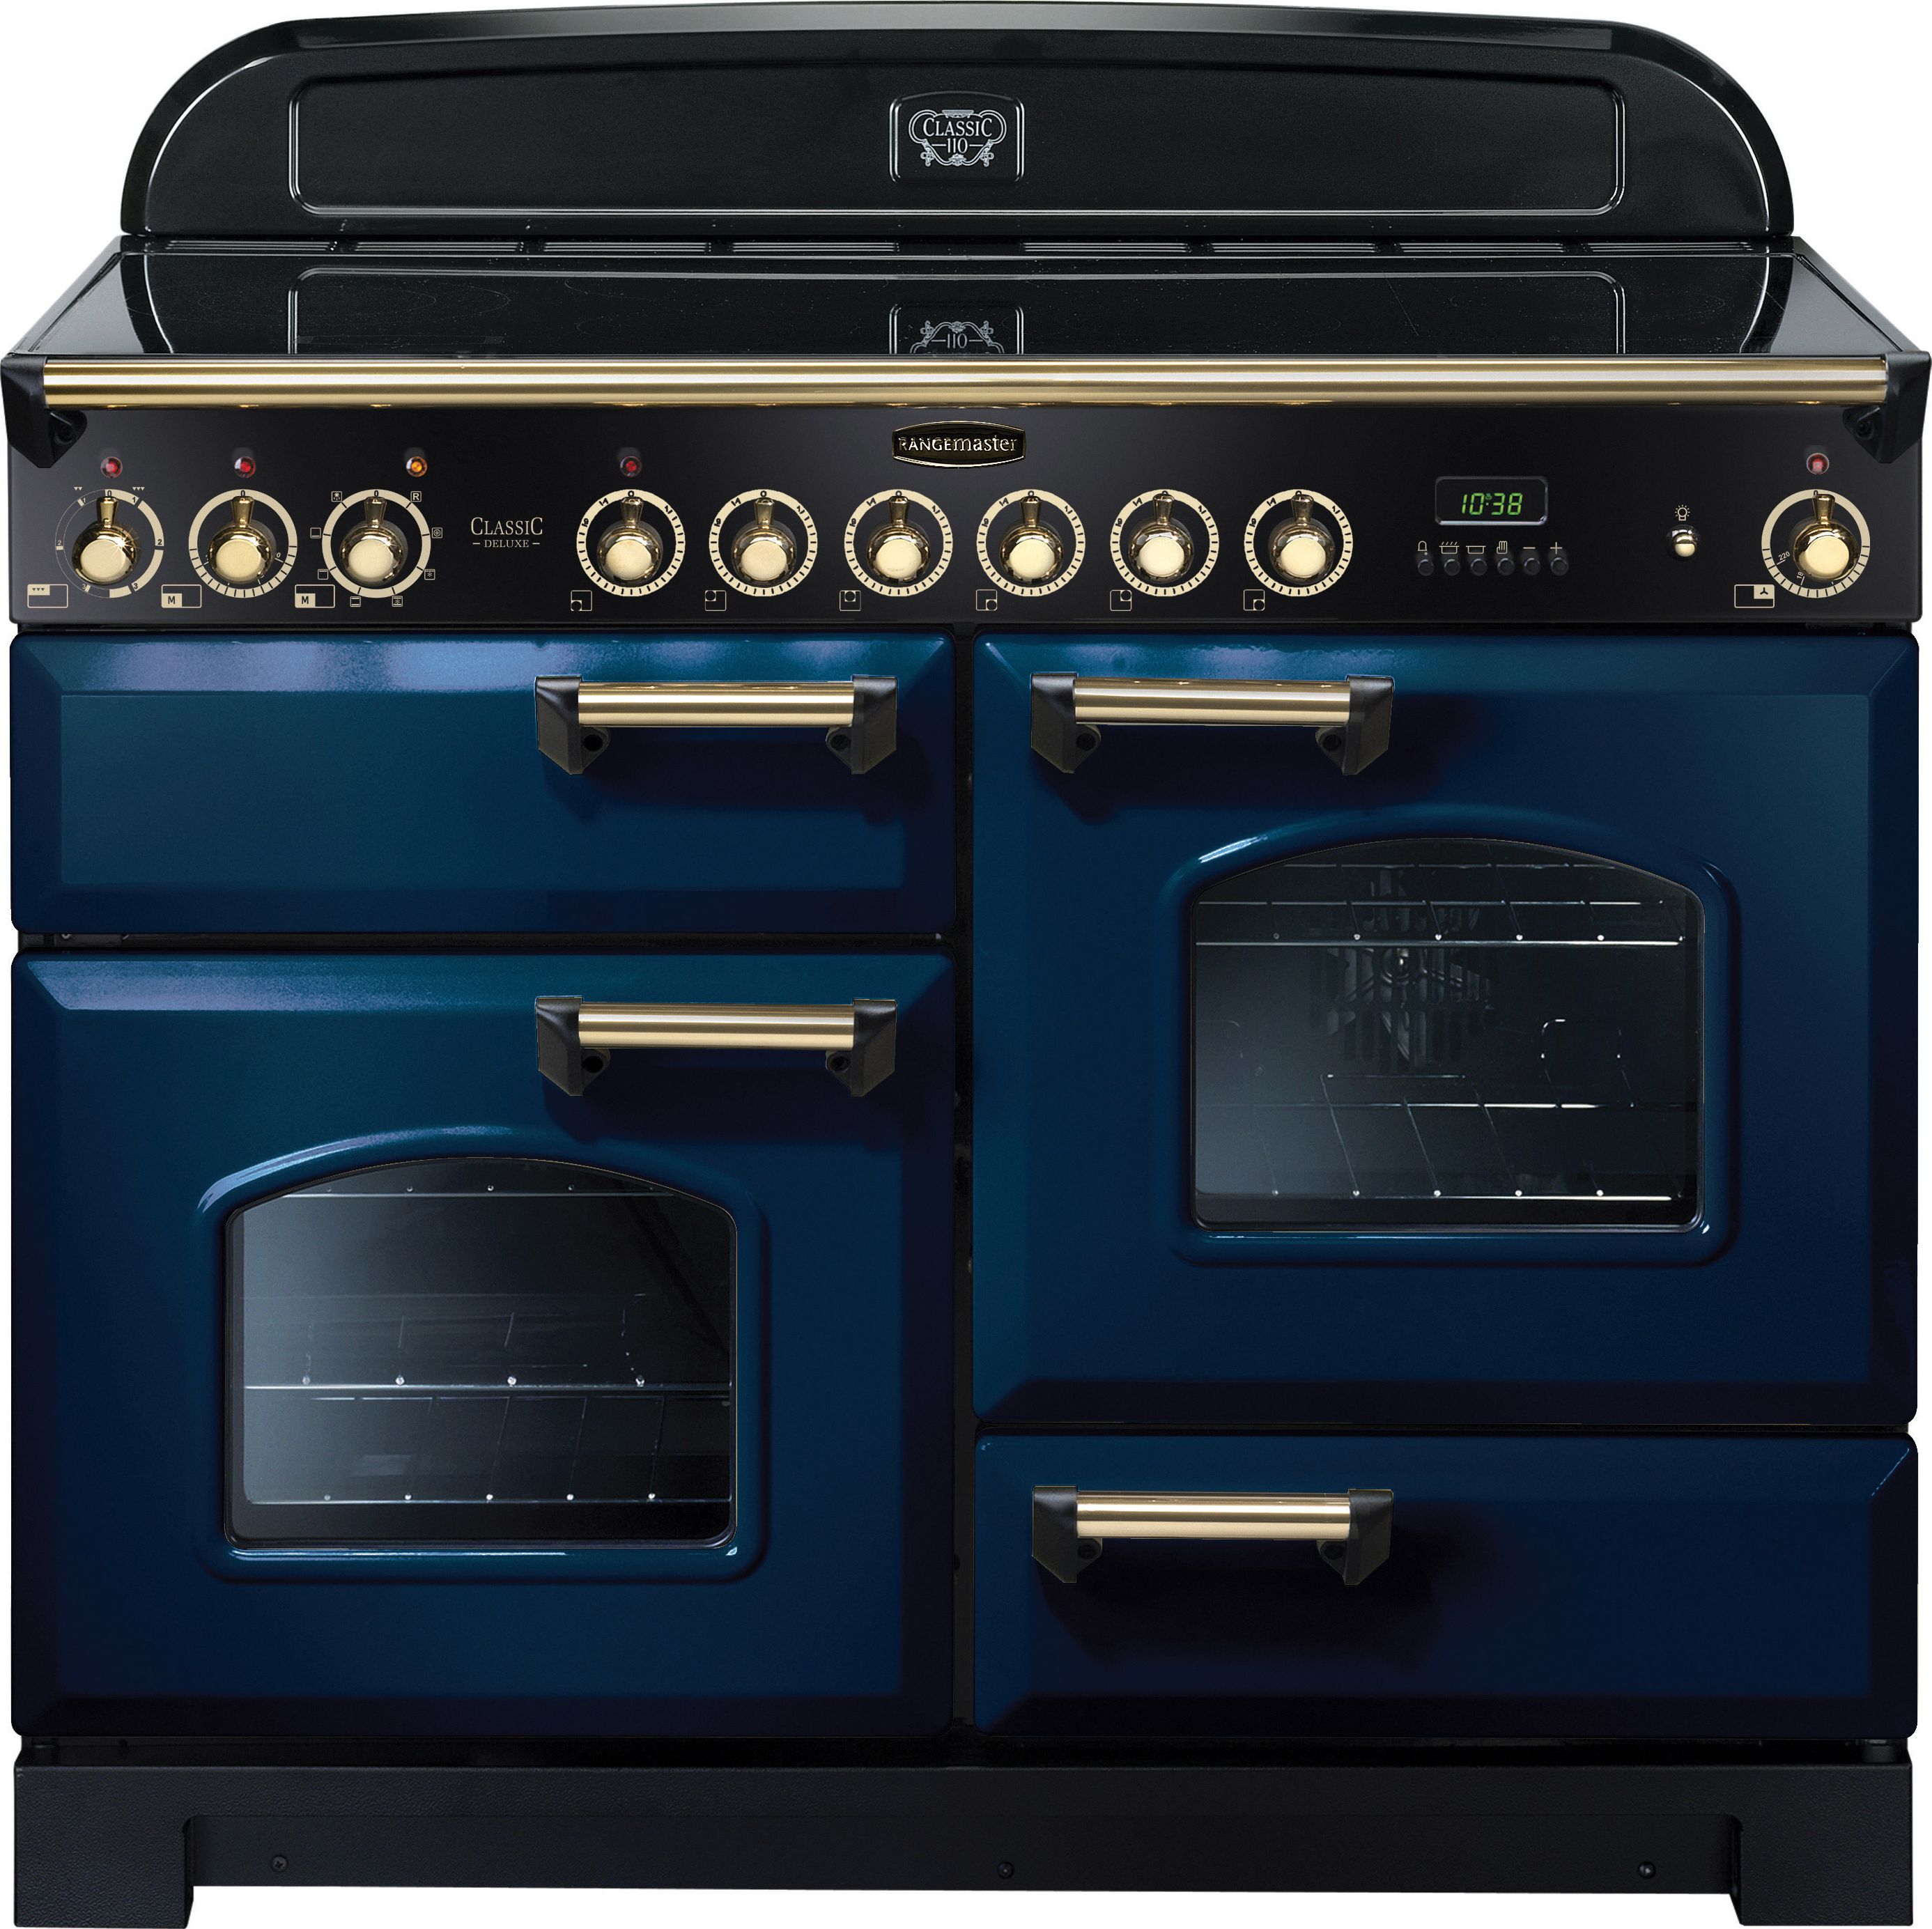 Rangemaster Classic Deluxe CDL110ECRB/B 110cm Electric Range Cooker with Ceramic Hob - Regal Blue / Brass - A/A Rated, Blue